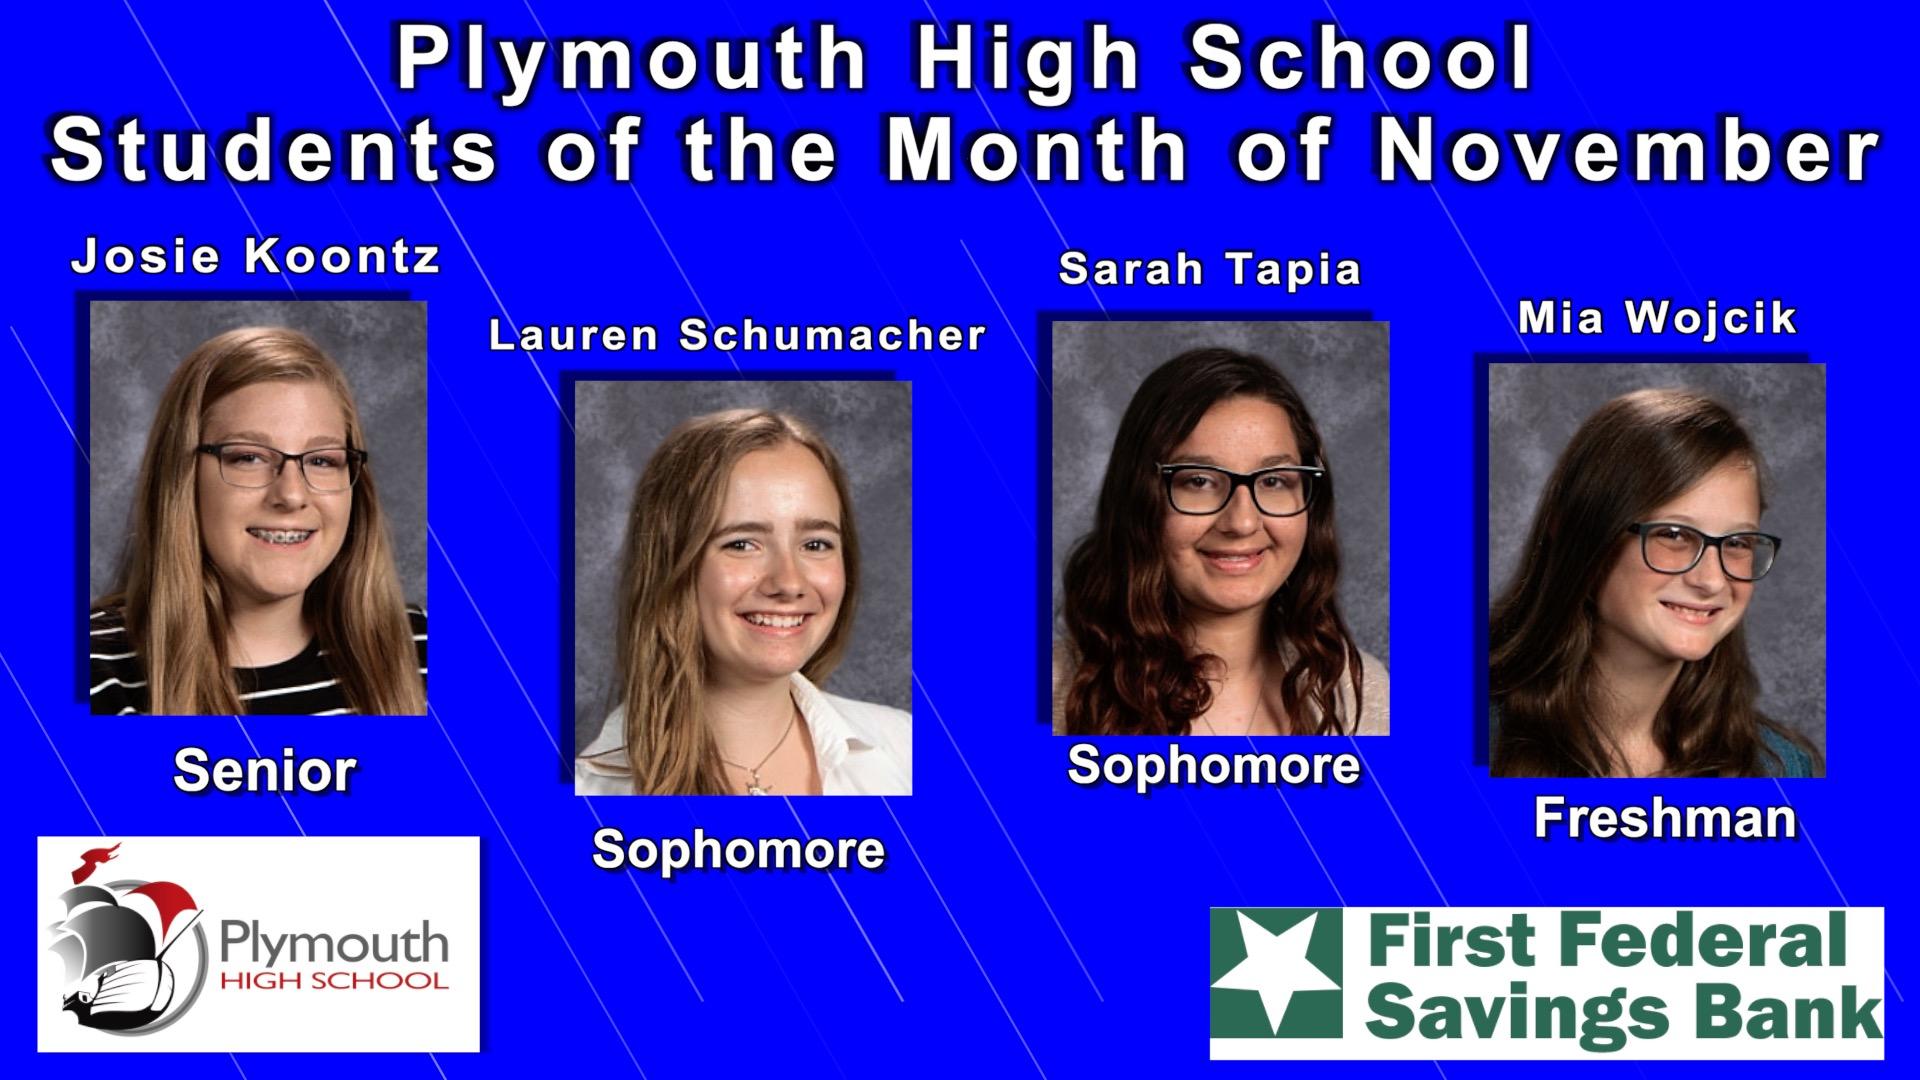 Plymouth High School First Federal Savings Bank Students of the Month of November